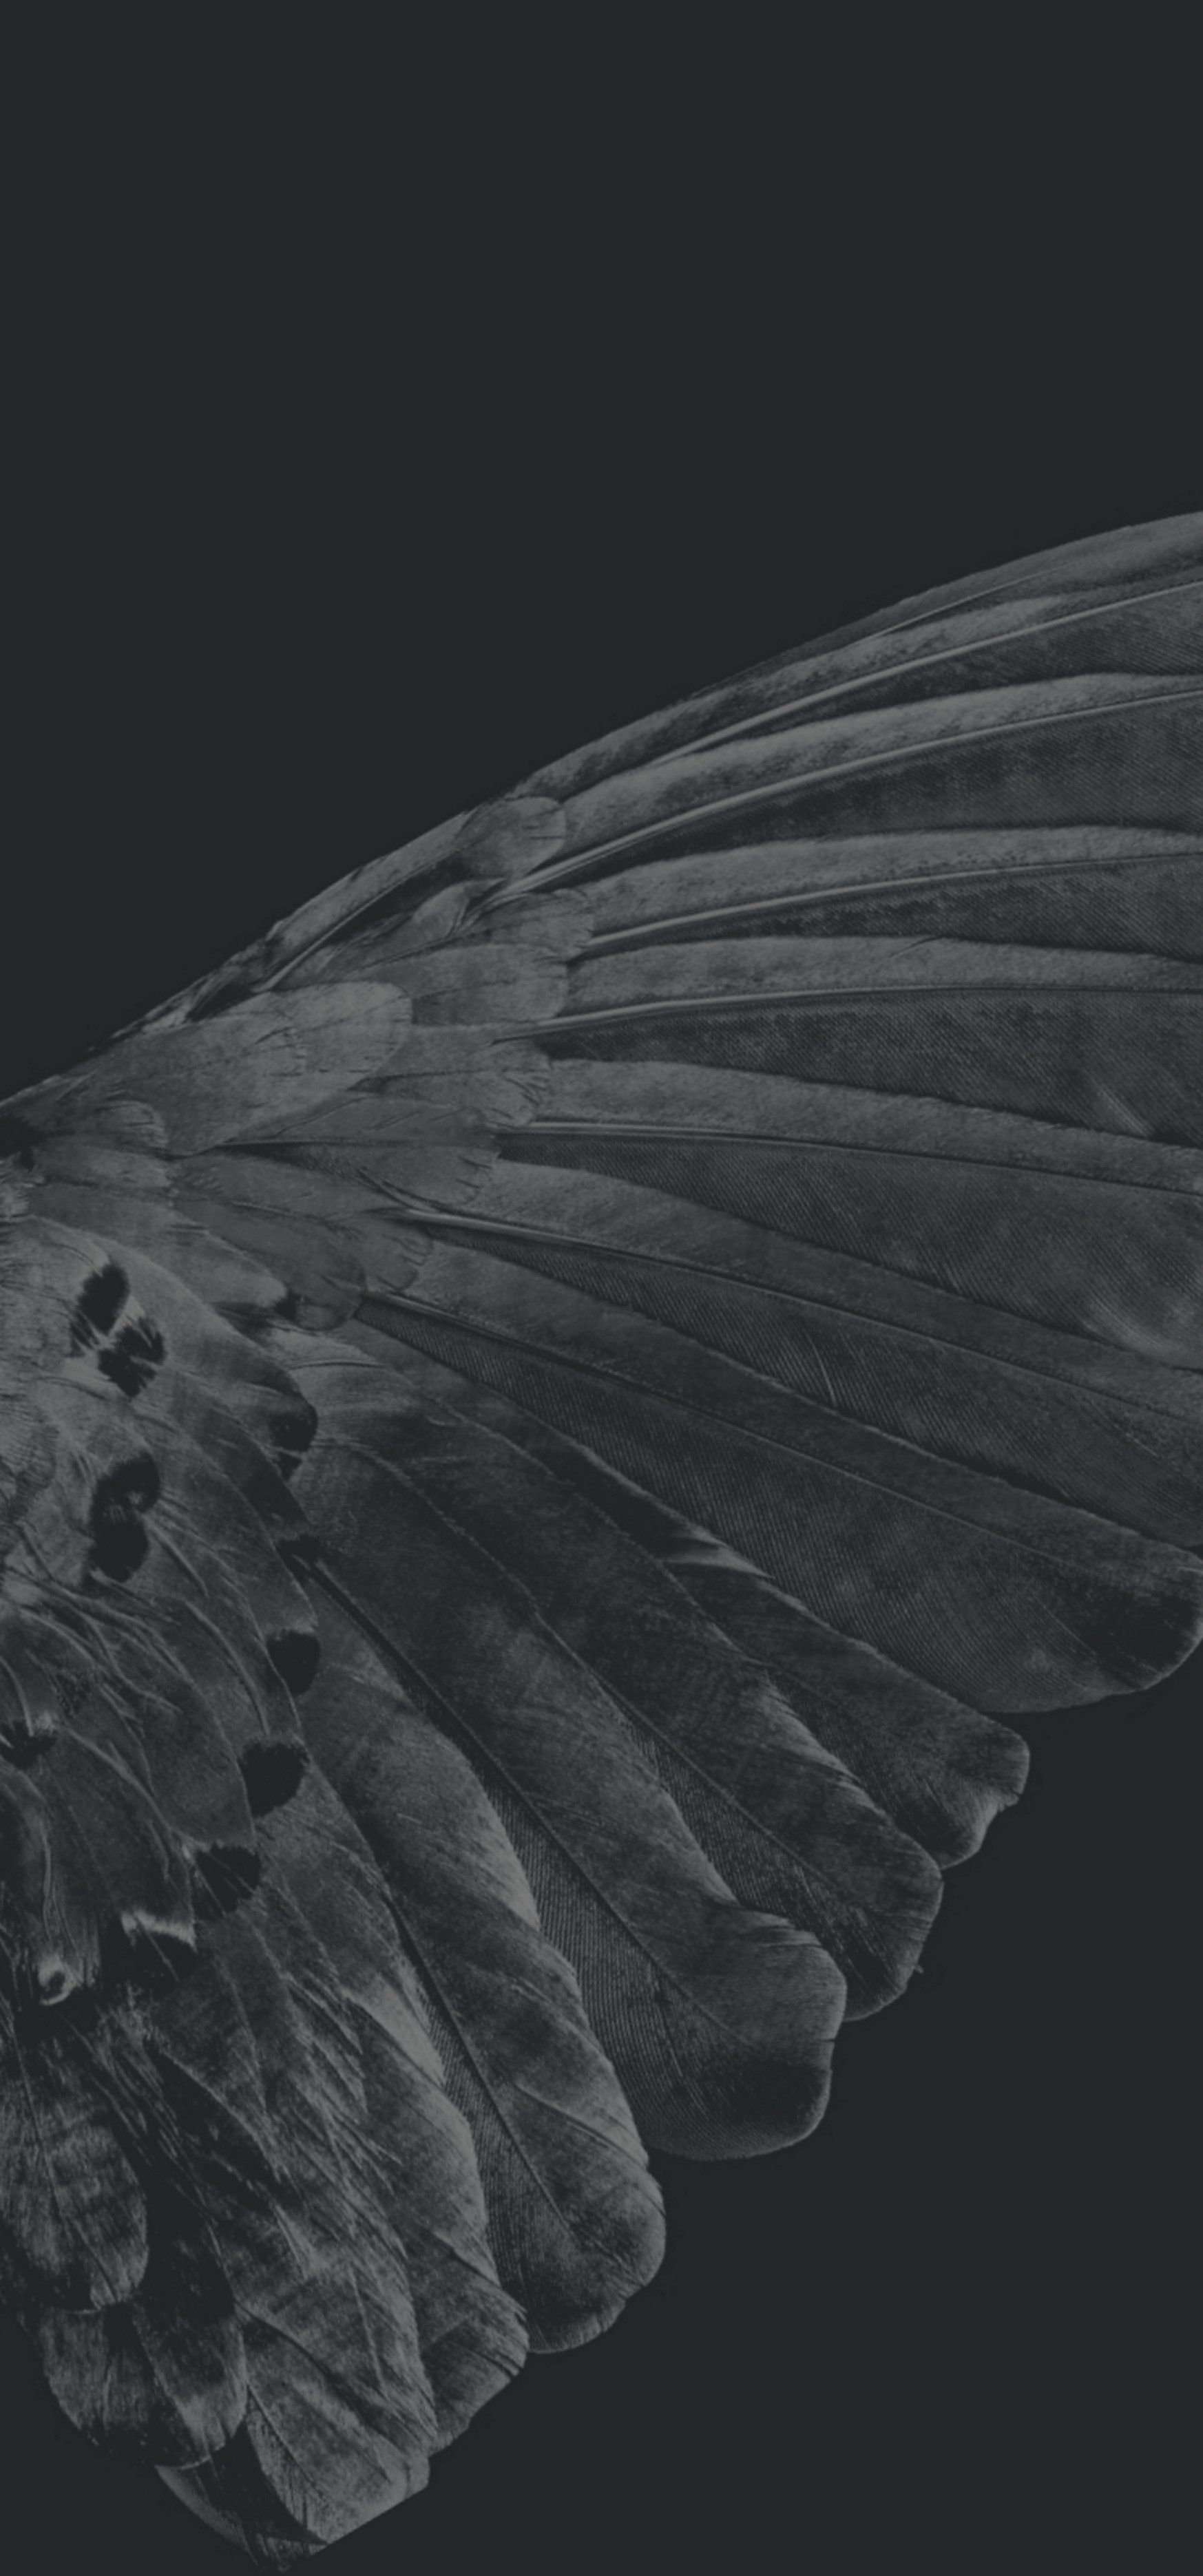 A black and white photo of a bird wing - Wings